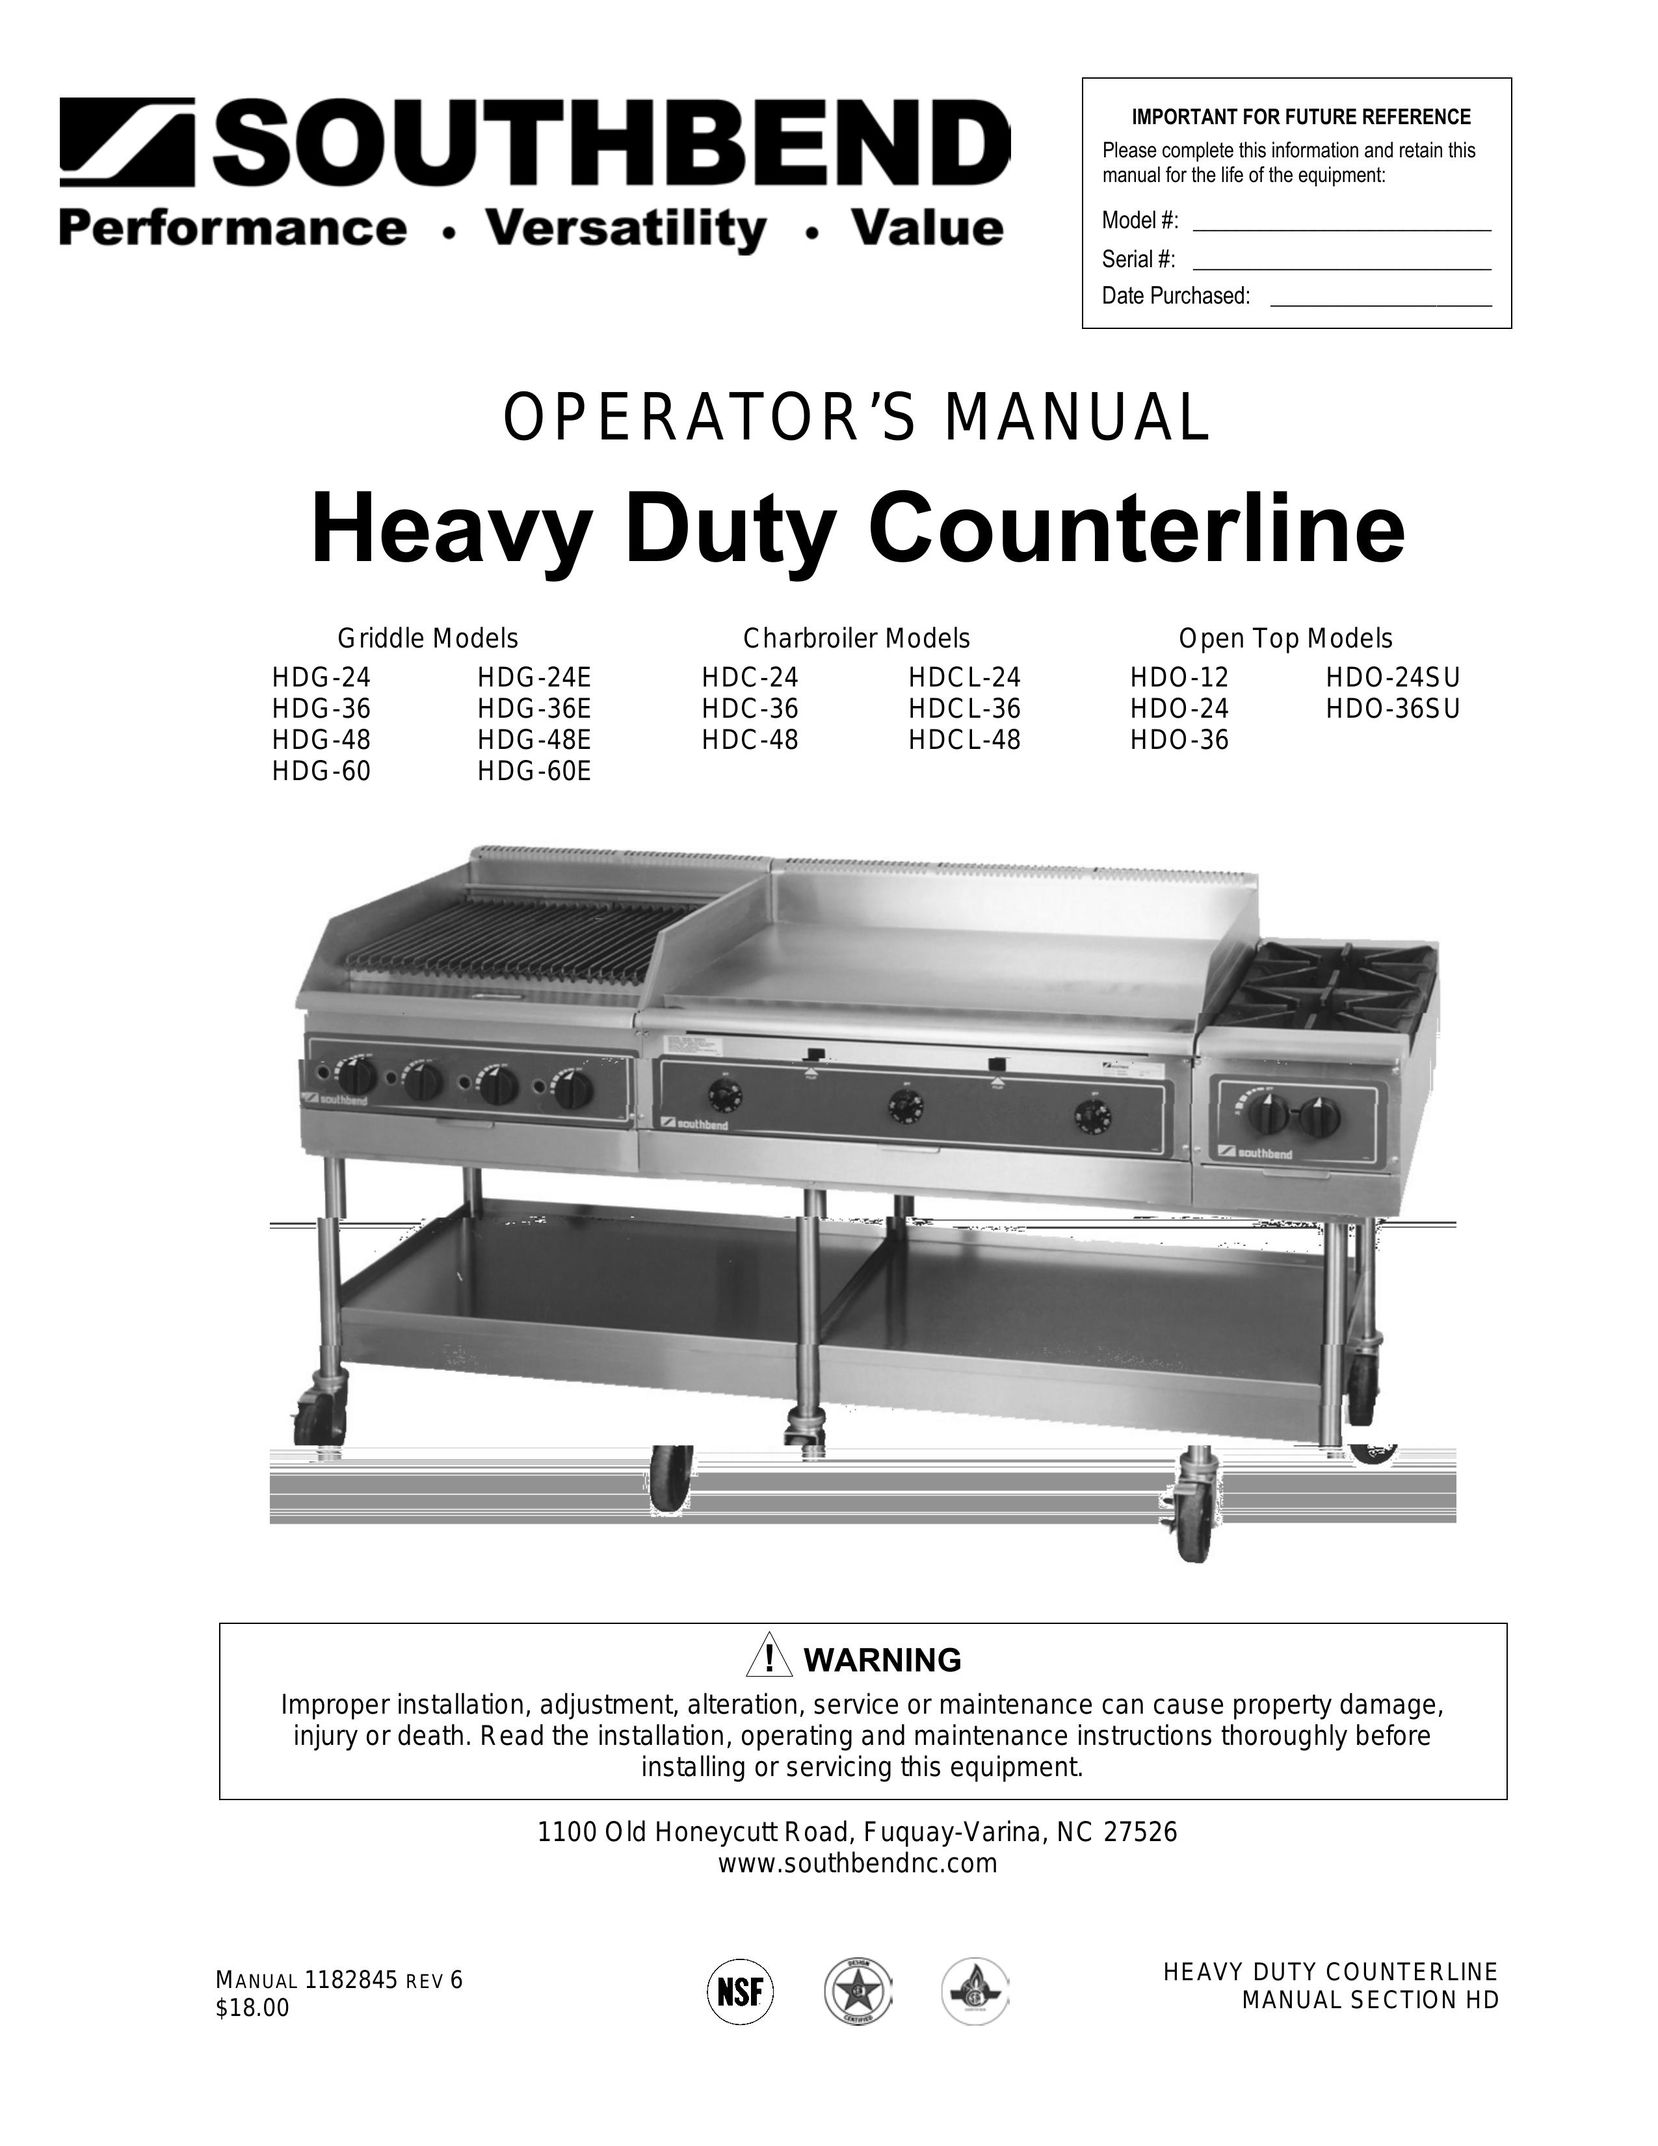 Southbend HDC-36 Cooktop User Manual